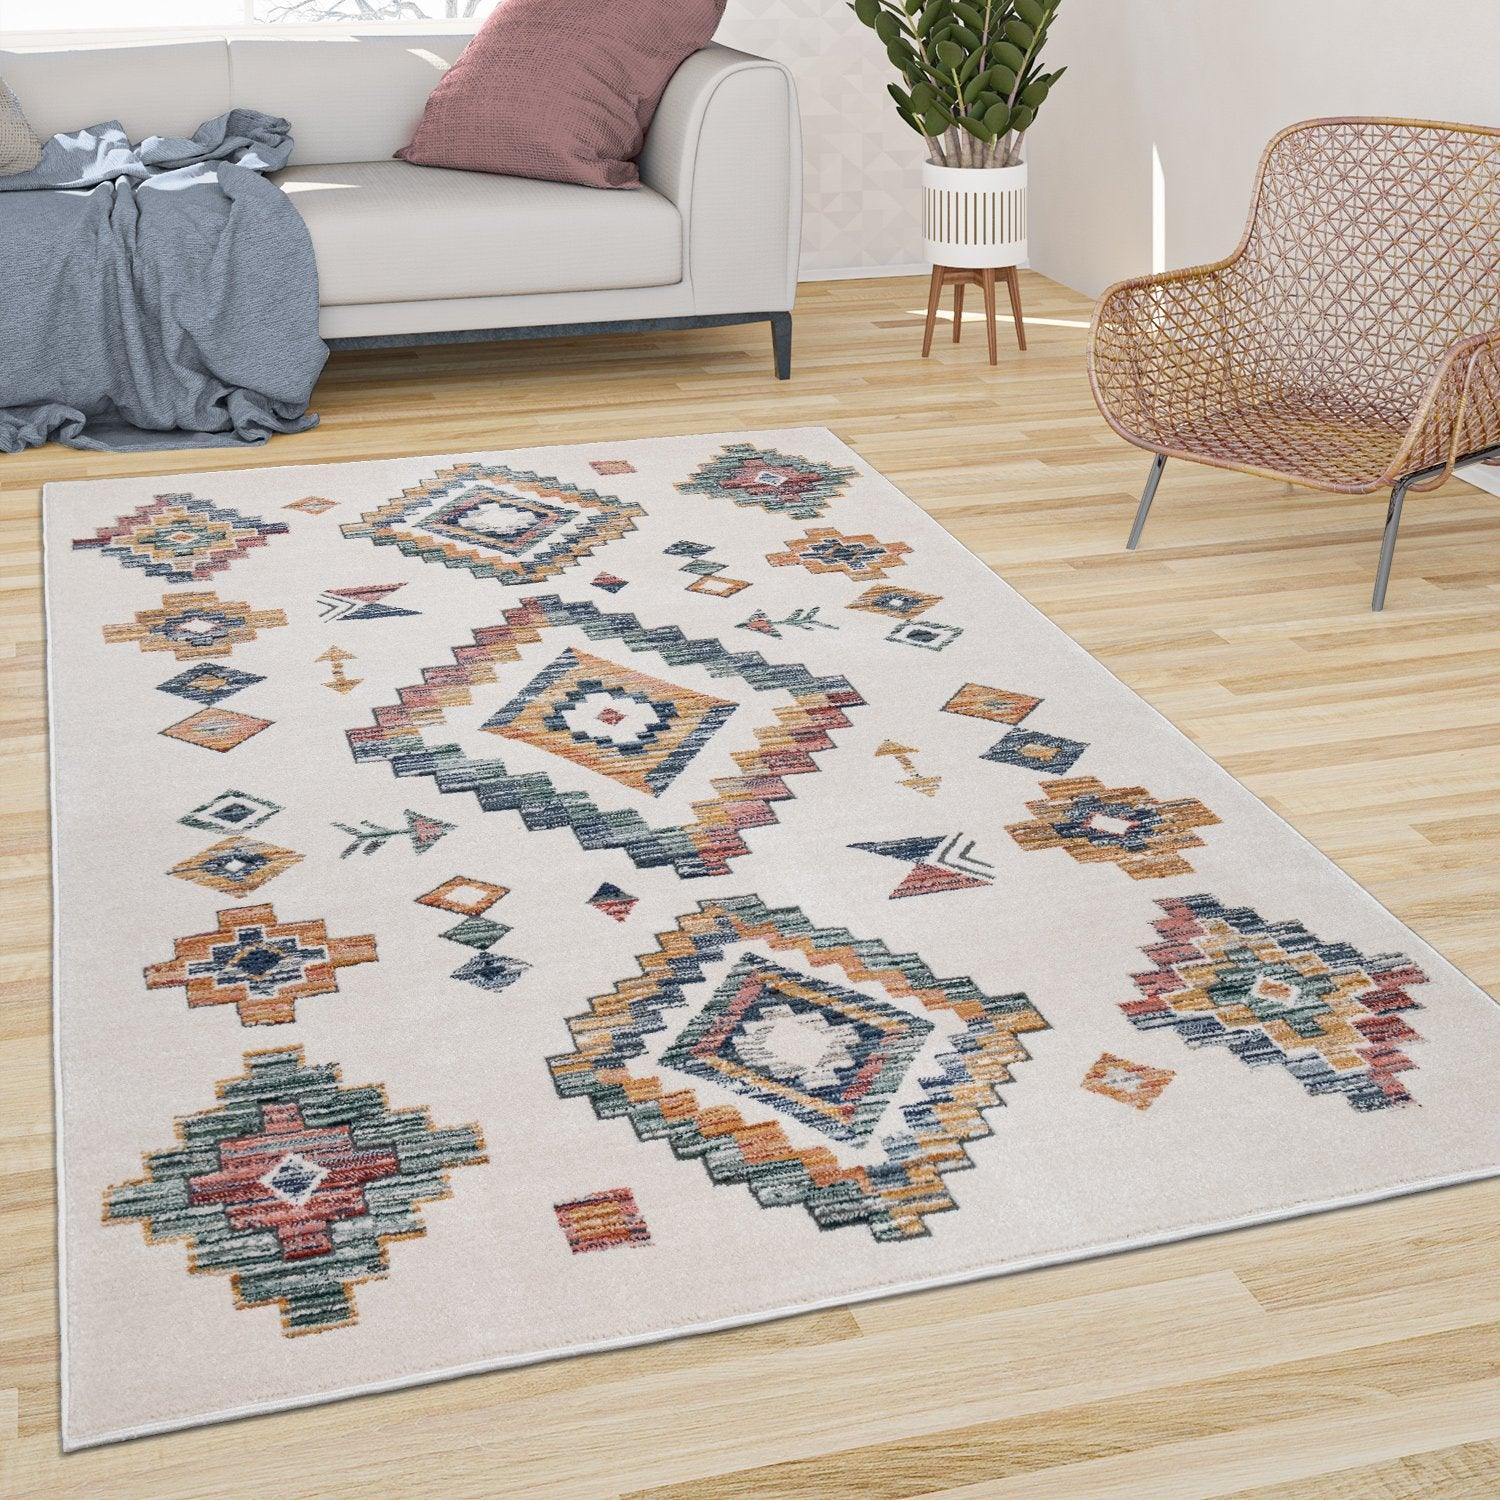 Paco Home Colorful Area Rug with Geometric Diamonds in Multicolor, Size:  5'3 x 7'7